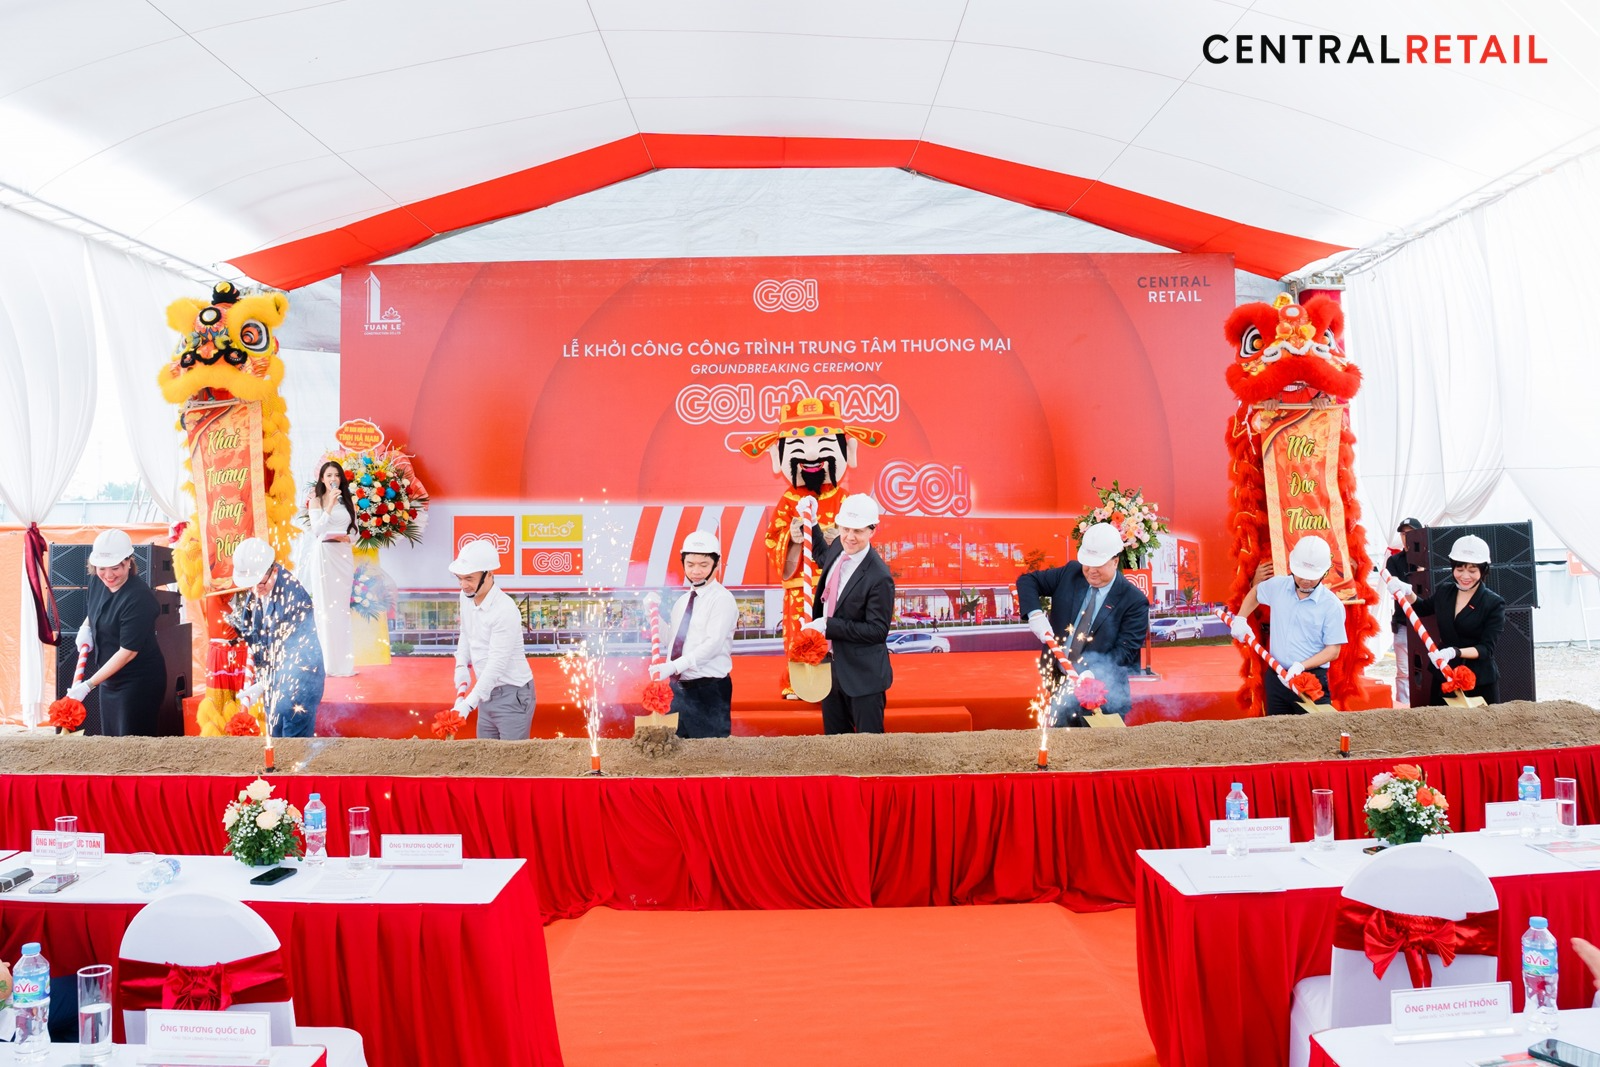 Central Retail in Vietnam hosts the Groundbreaking Ceremony for GO! Mall Ha Nam